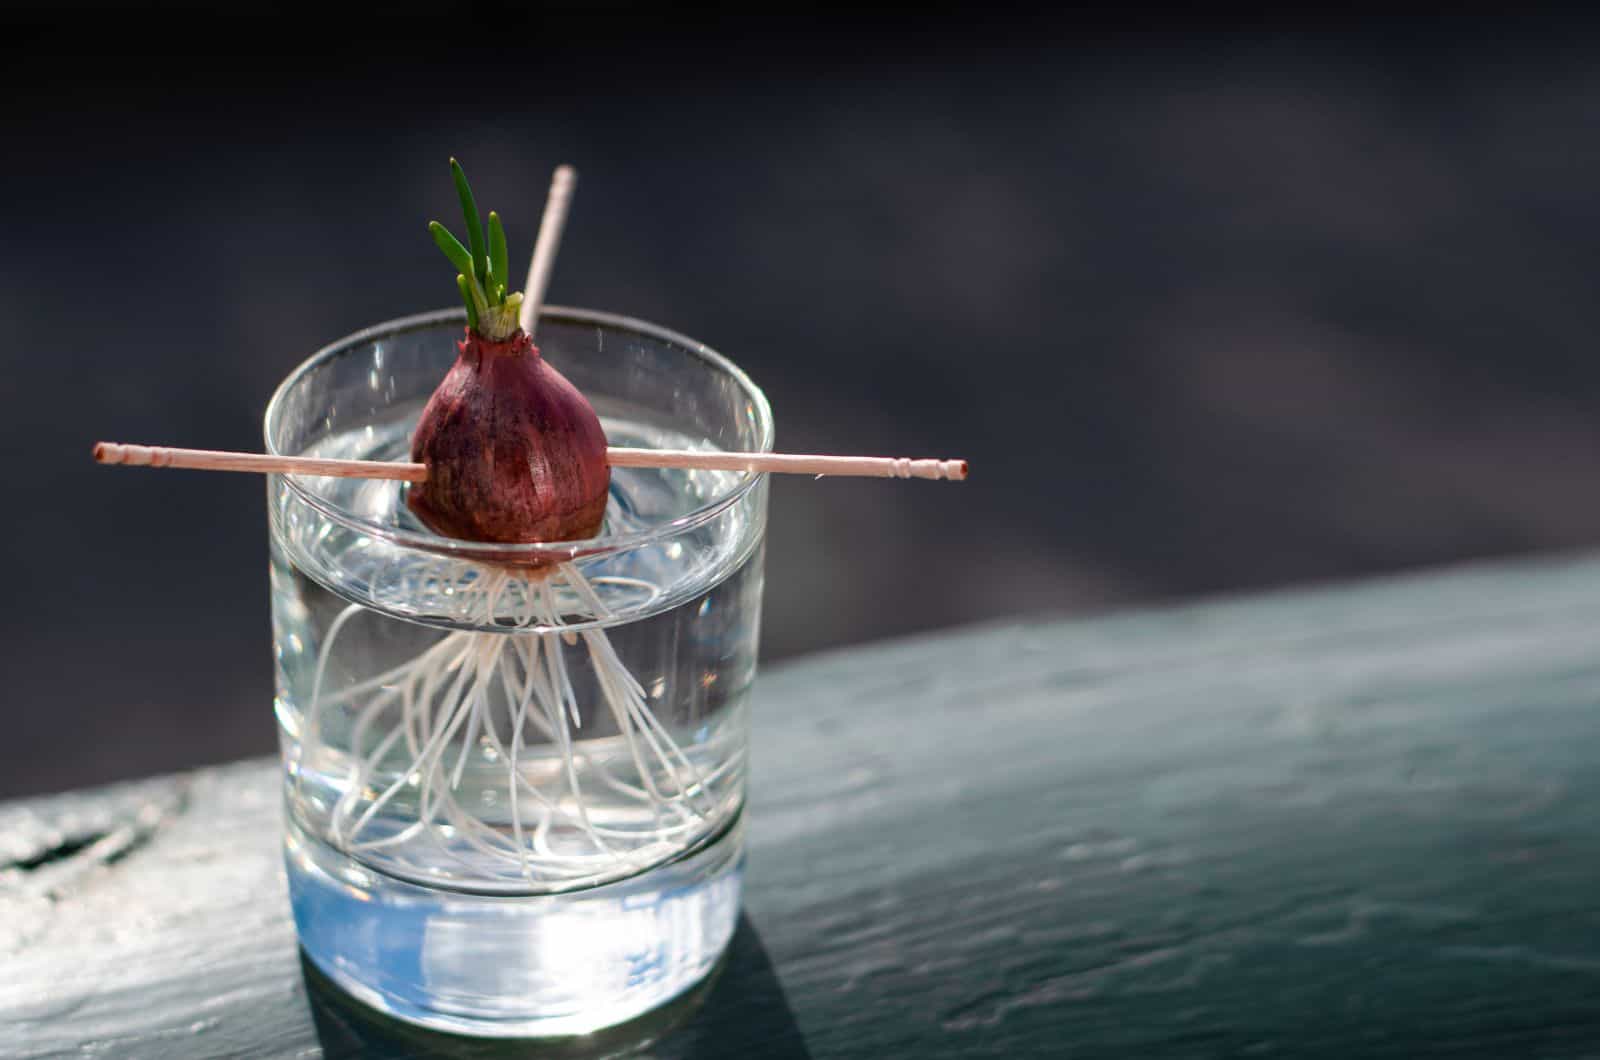 onion in glass of water